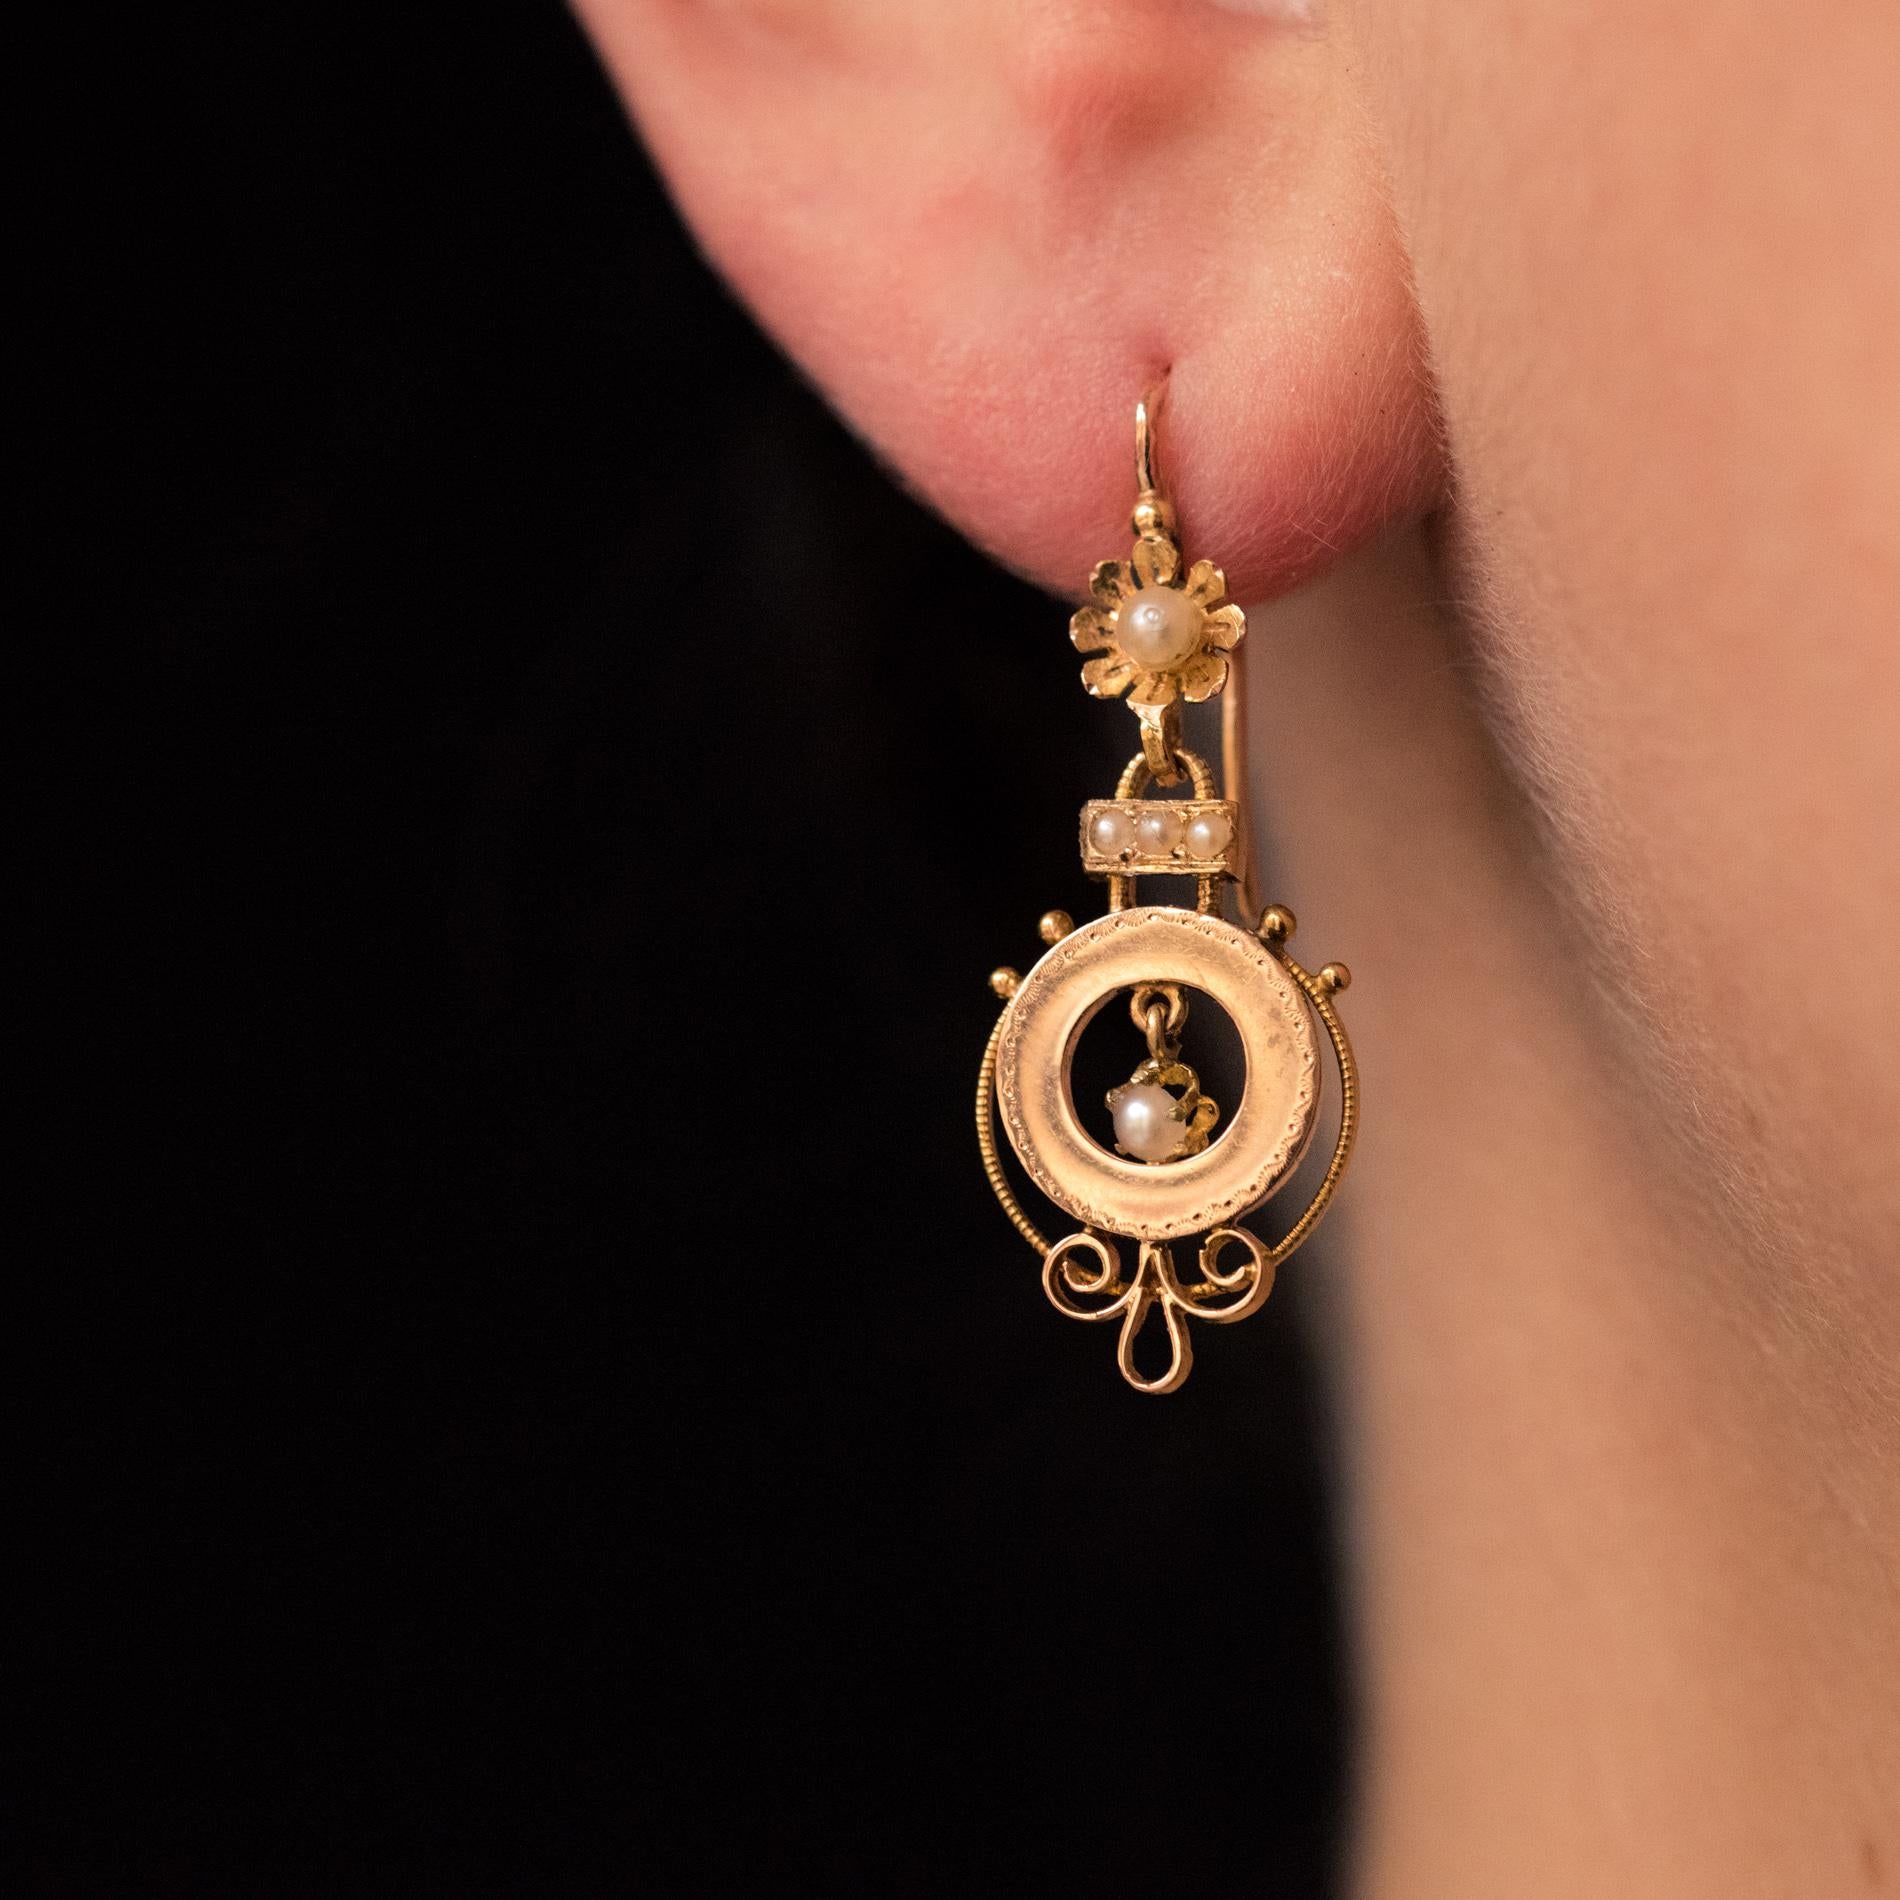 For pierced ears.
Earrings in 18 karat rose gold, eagle's head hallmark.
Pair of ear pendants, each one consists of a lever- back earring representing a daisy whose heart is a natural pearl. It retains a circular motif as a pendant with a chiseled